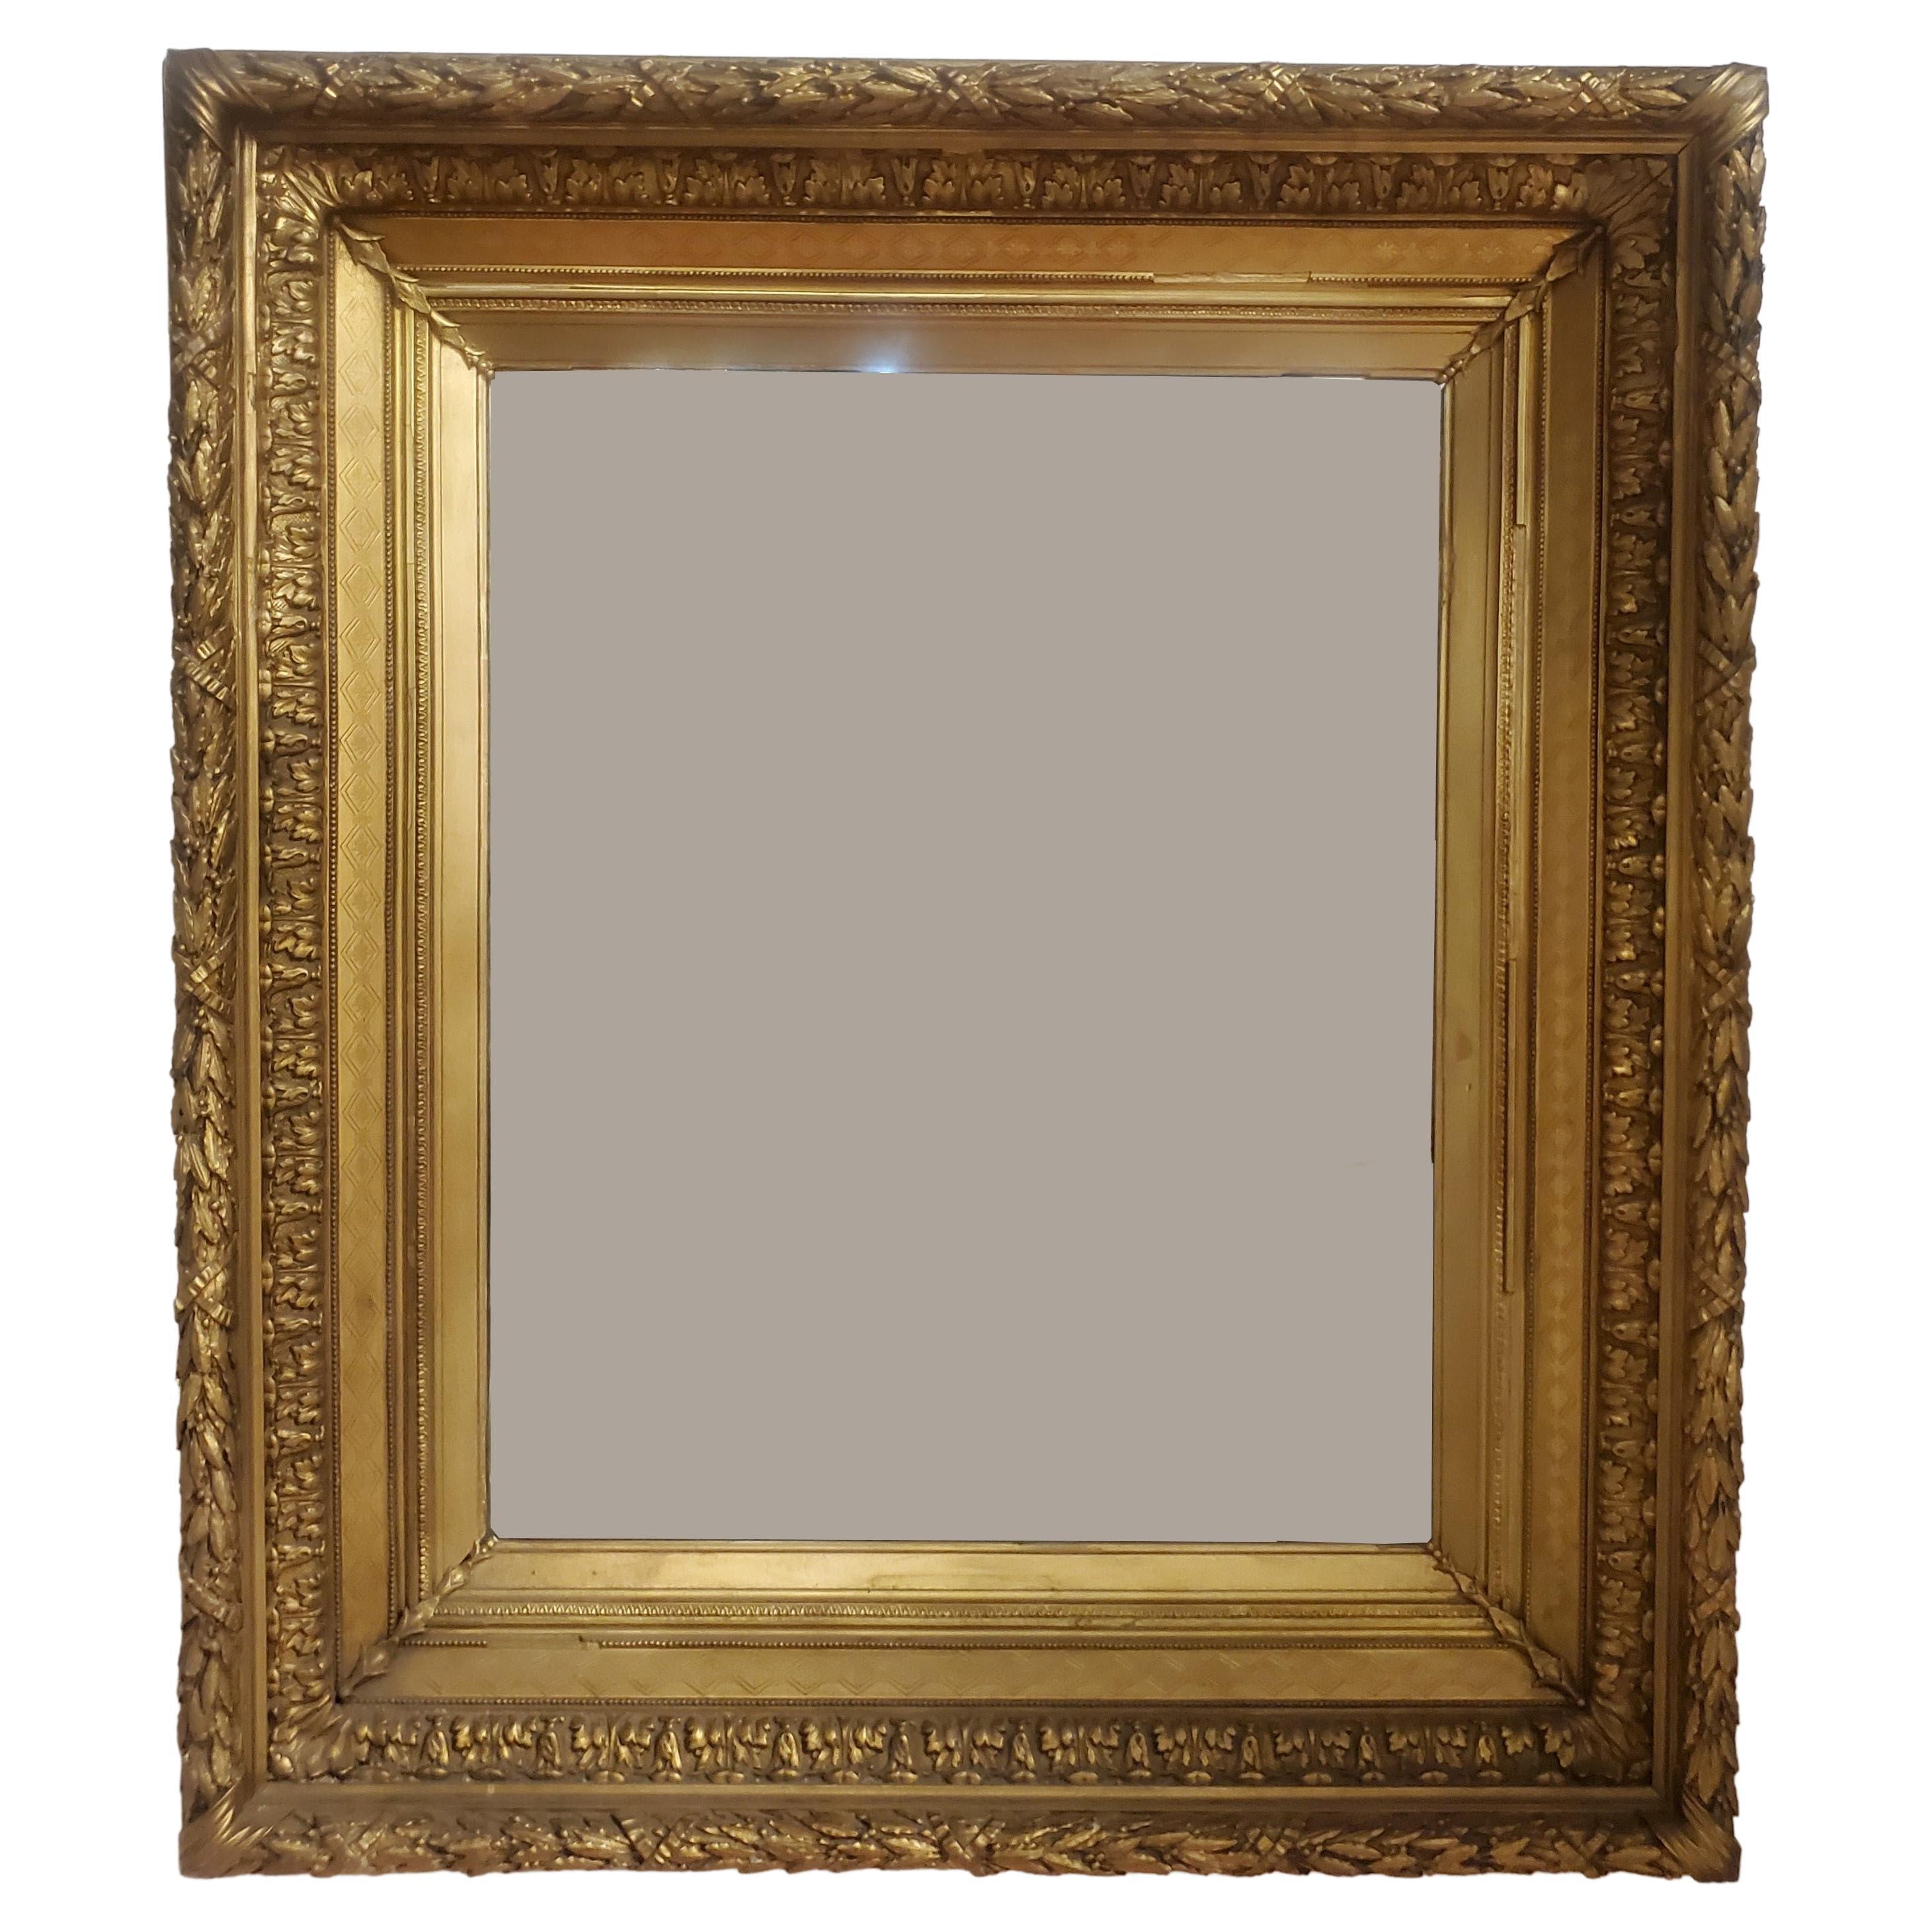 Large antique French gilt wood and gesso wall mirror circa 1890. An opulent and highly decorative Louis XVI style mirror featuring beautiful acanthus leaf design combined with delicate egg and dart bars. The impressively broad frame shows several